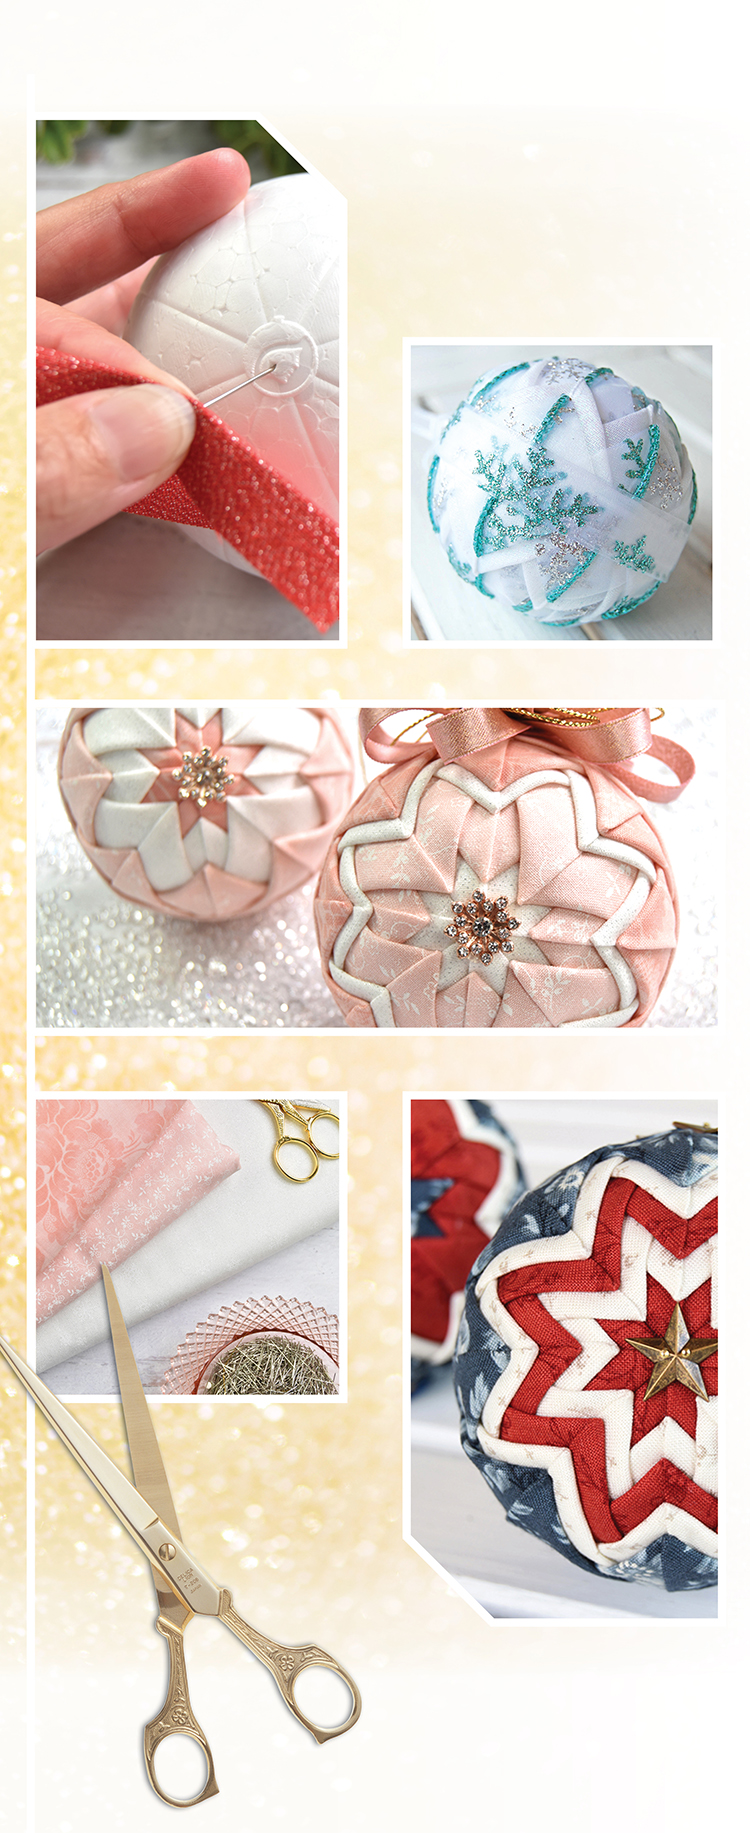 make-quilted-no-sew-ornament-balls-pattern-tutorial